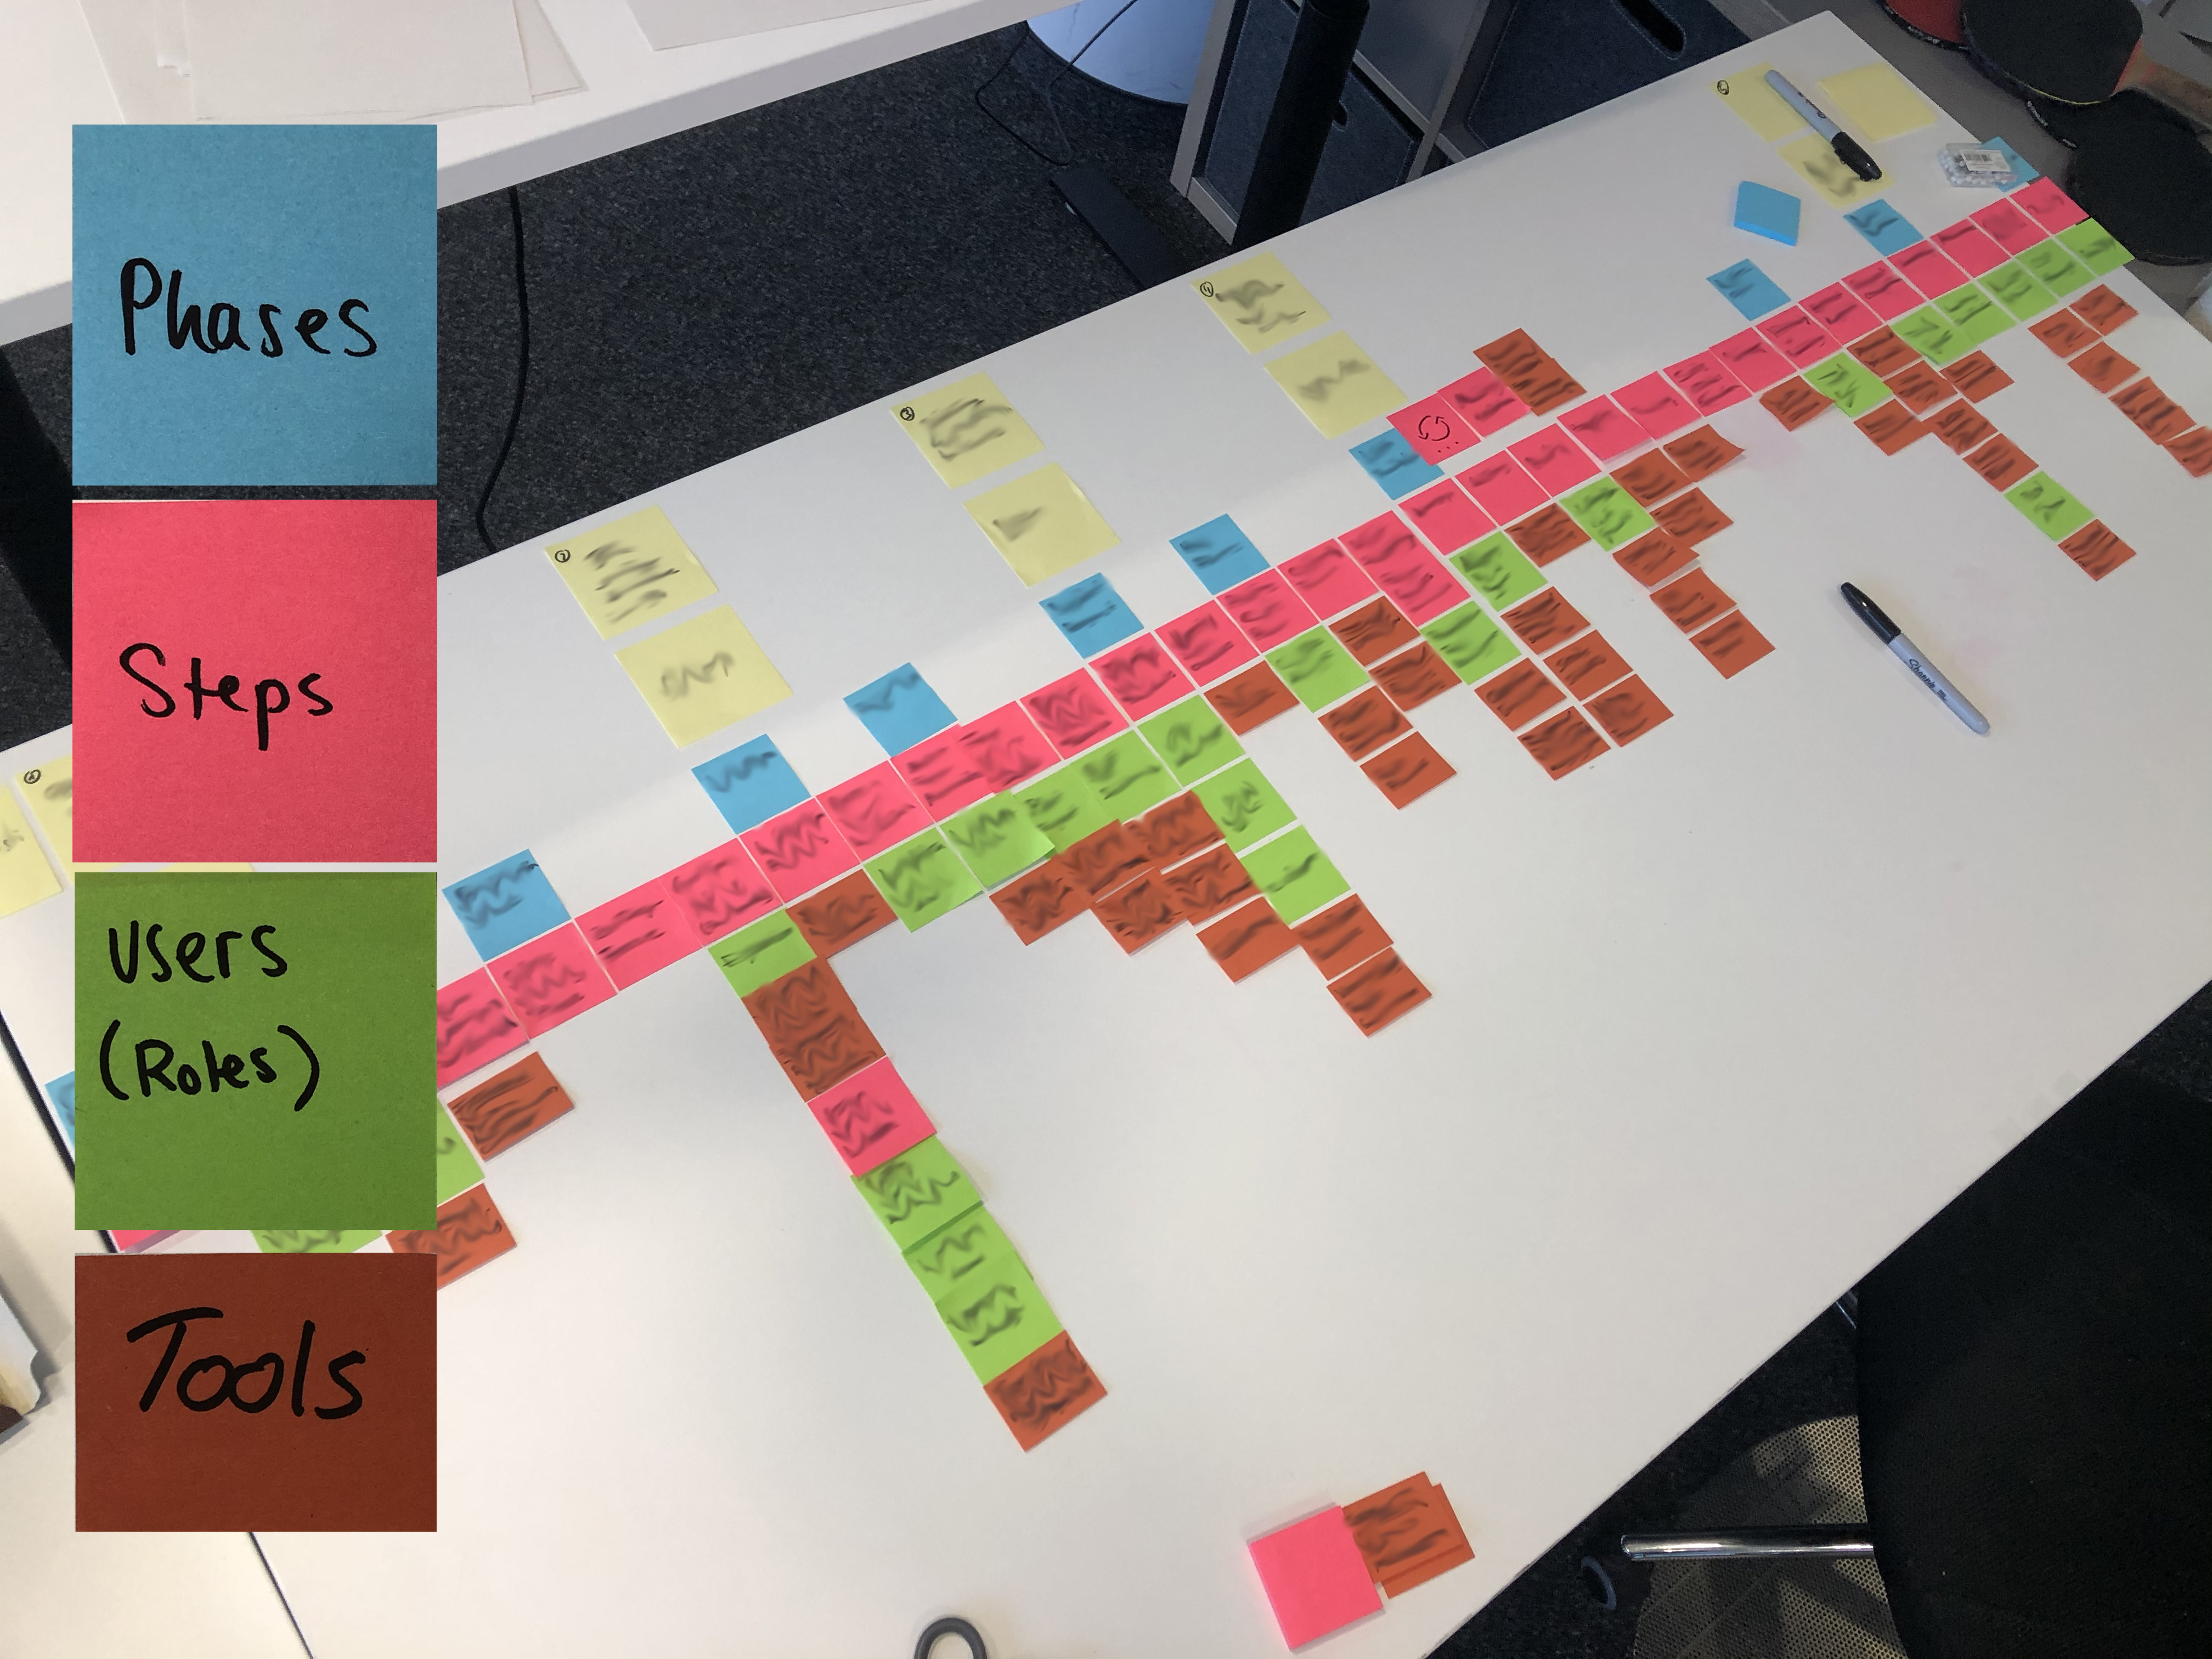 Example of a User Journey Map (censored) / My photo